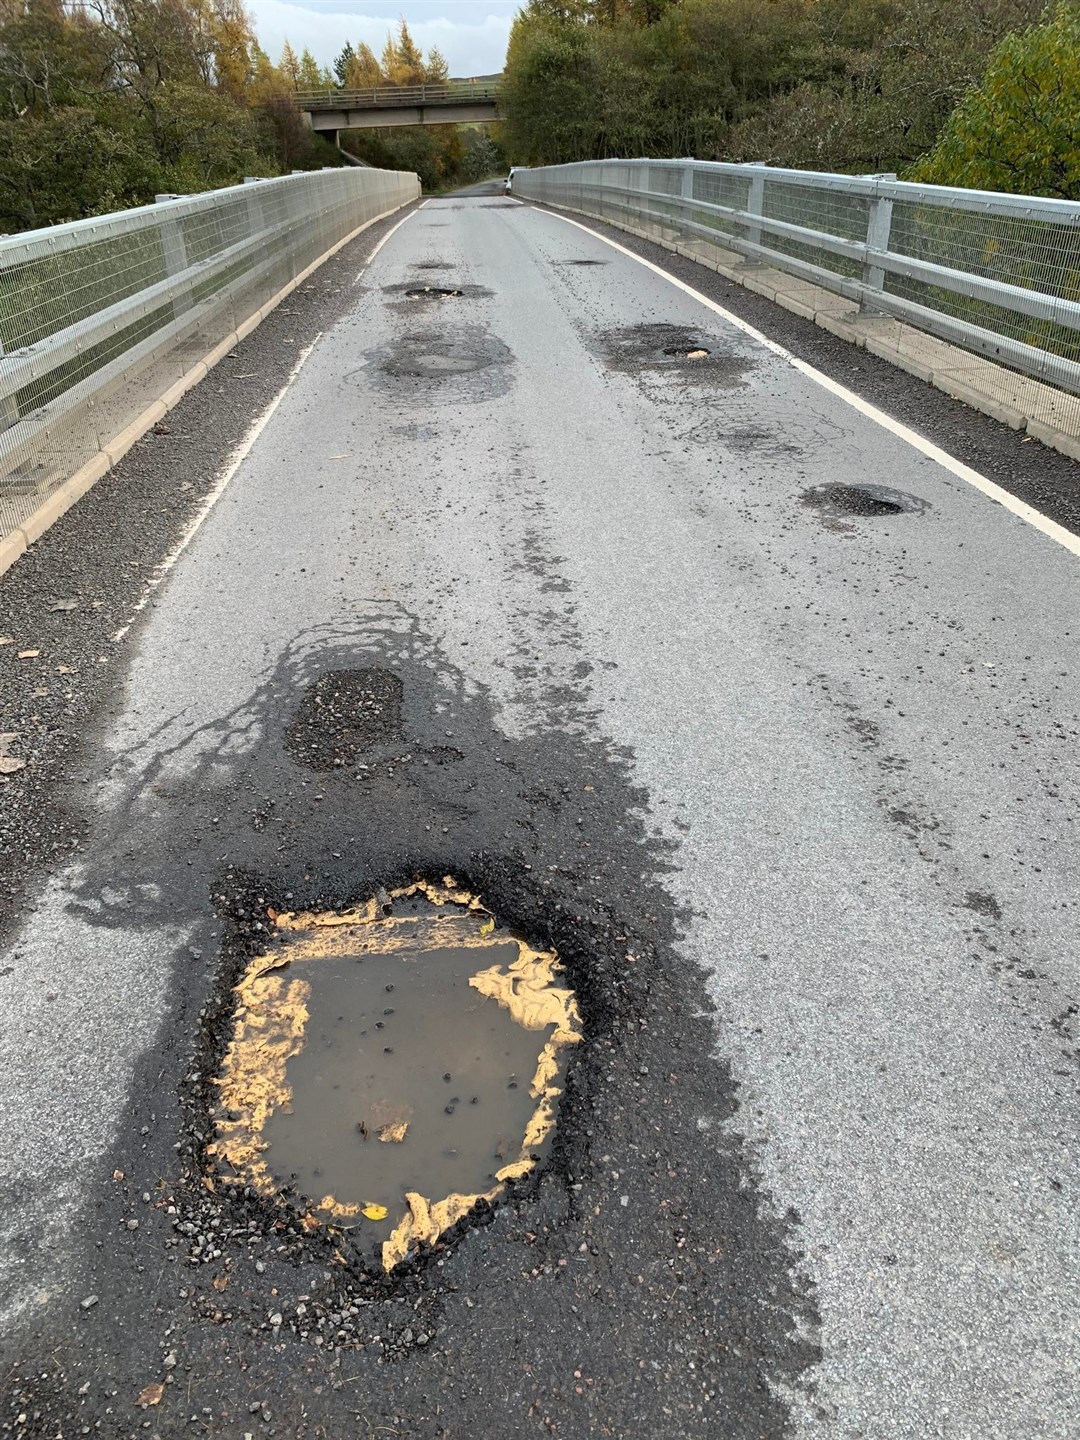 Gone for good? The bridge has been plagued with potholes for years and the community will be praying that this make-over is more trhan cosmetic. The omens are good, say first travellers.